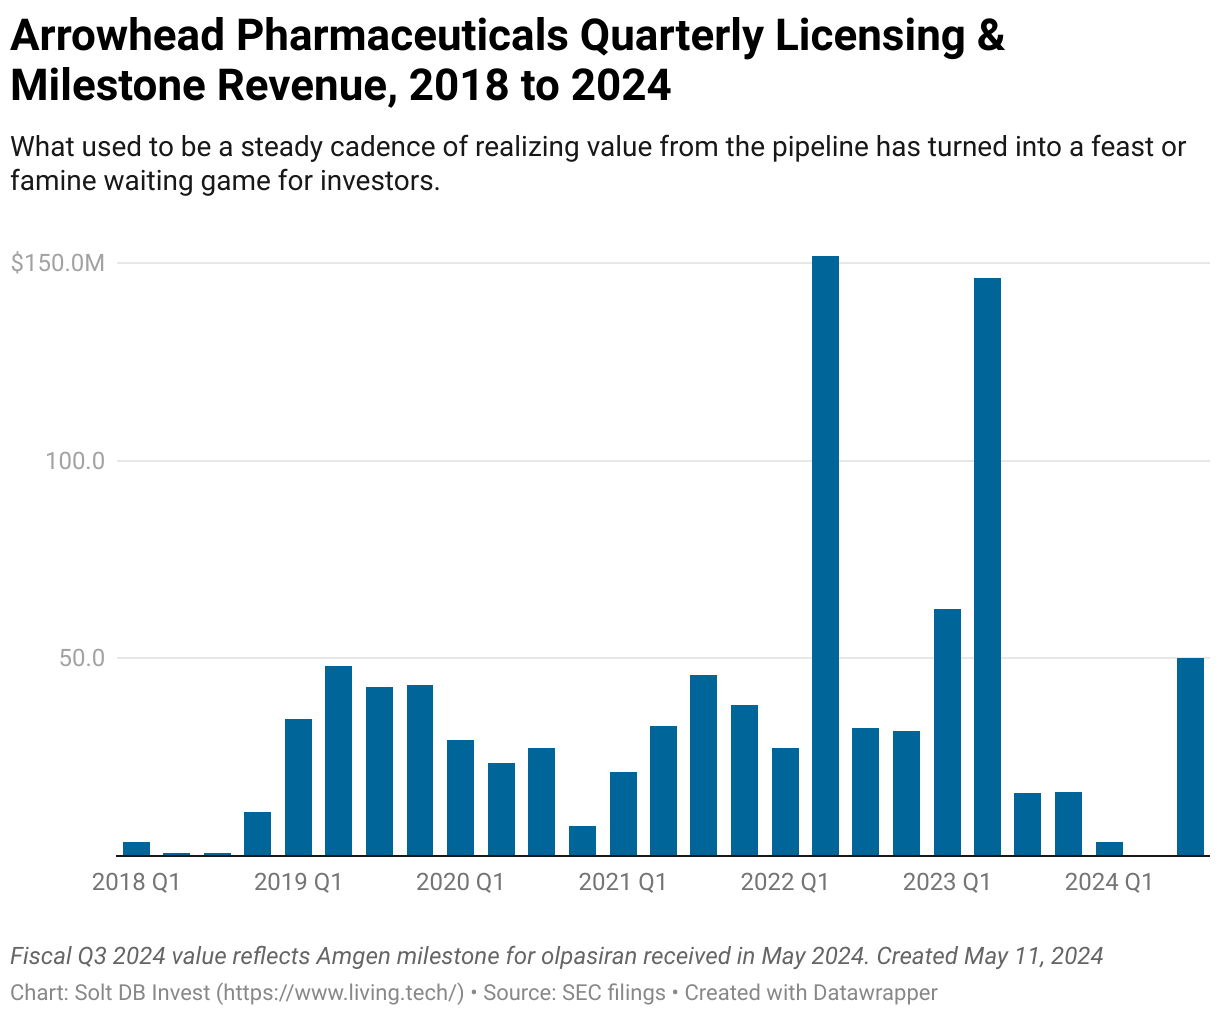 A column chart showing quarterly R&amp;D revenue for Arrowhead Pharmaceuticals from 2018 to 2024.